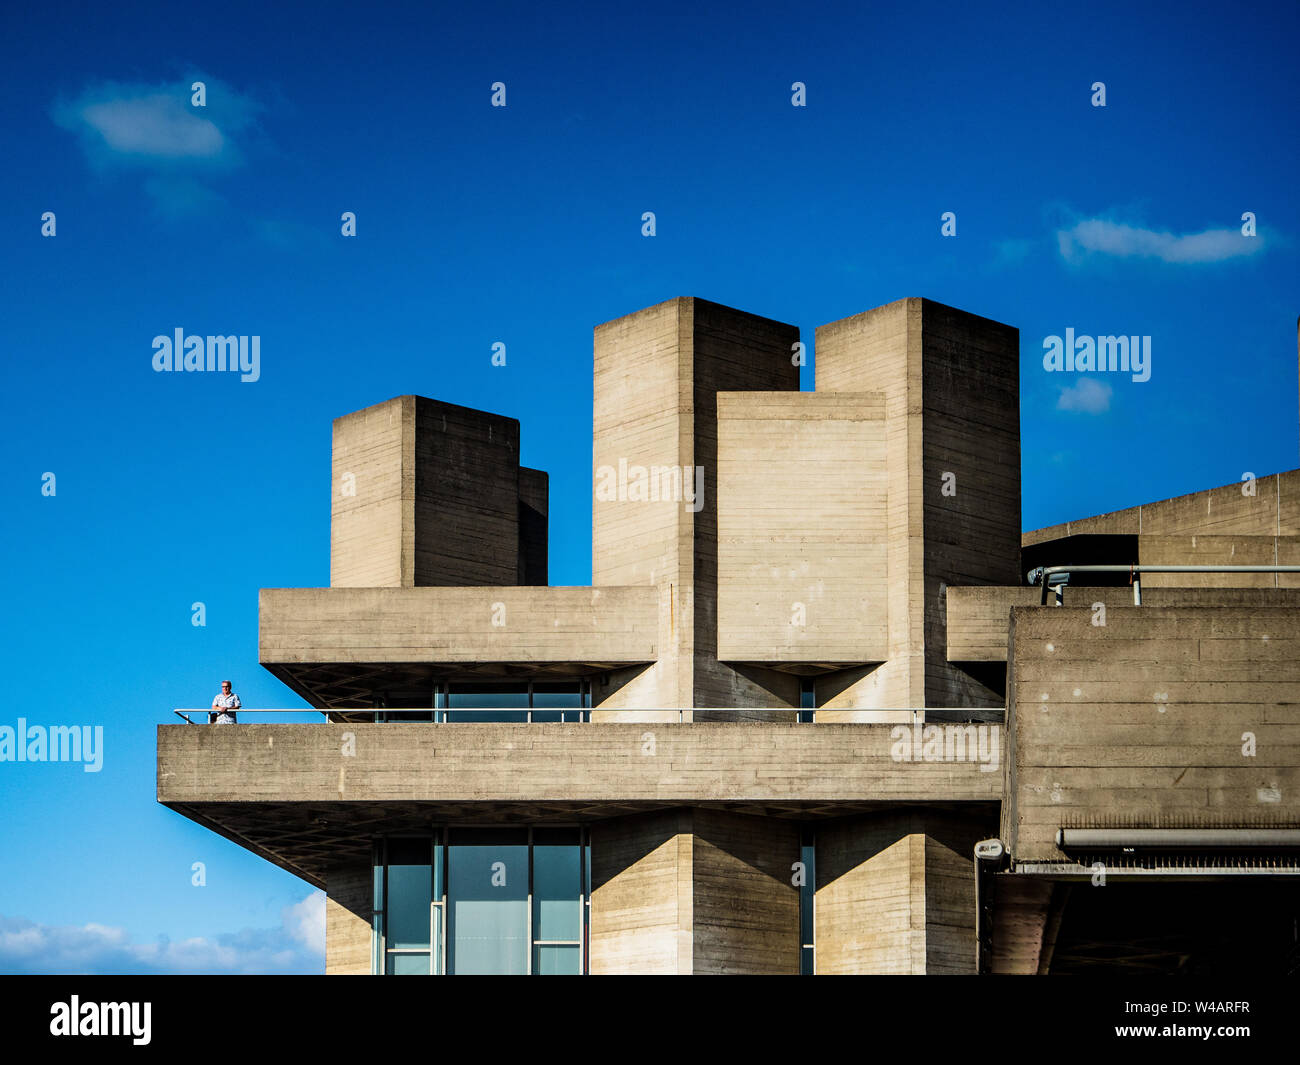 Brutalist Architecture London. The National Theatre on London's SouthBank detail of the brutalist style architecture 1976-77 architect Denys Lasdun Stock Photo